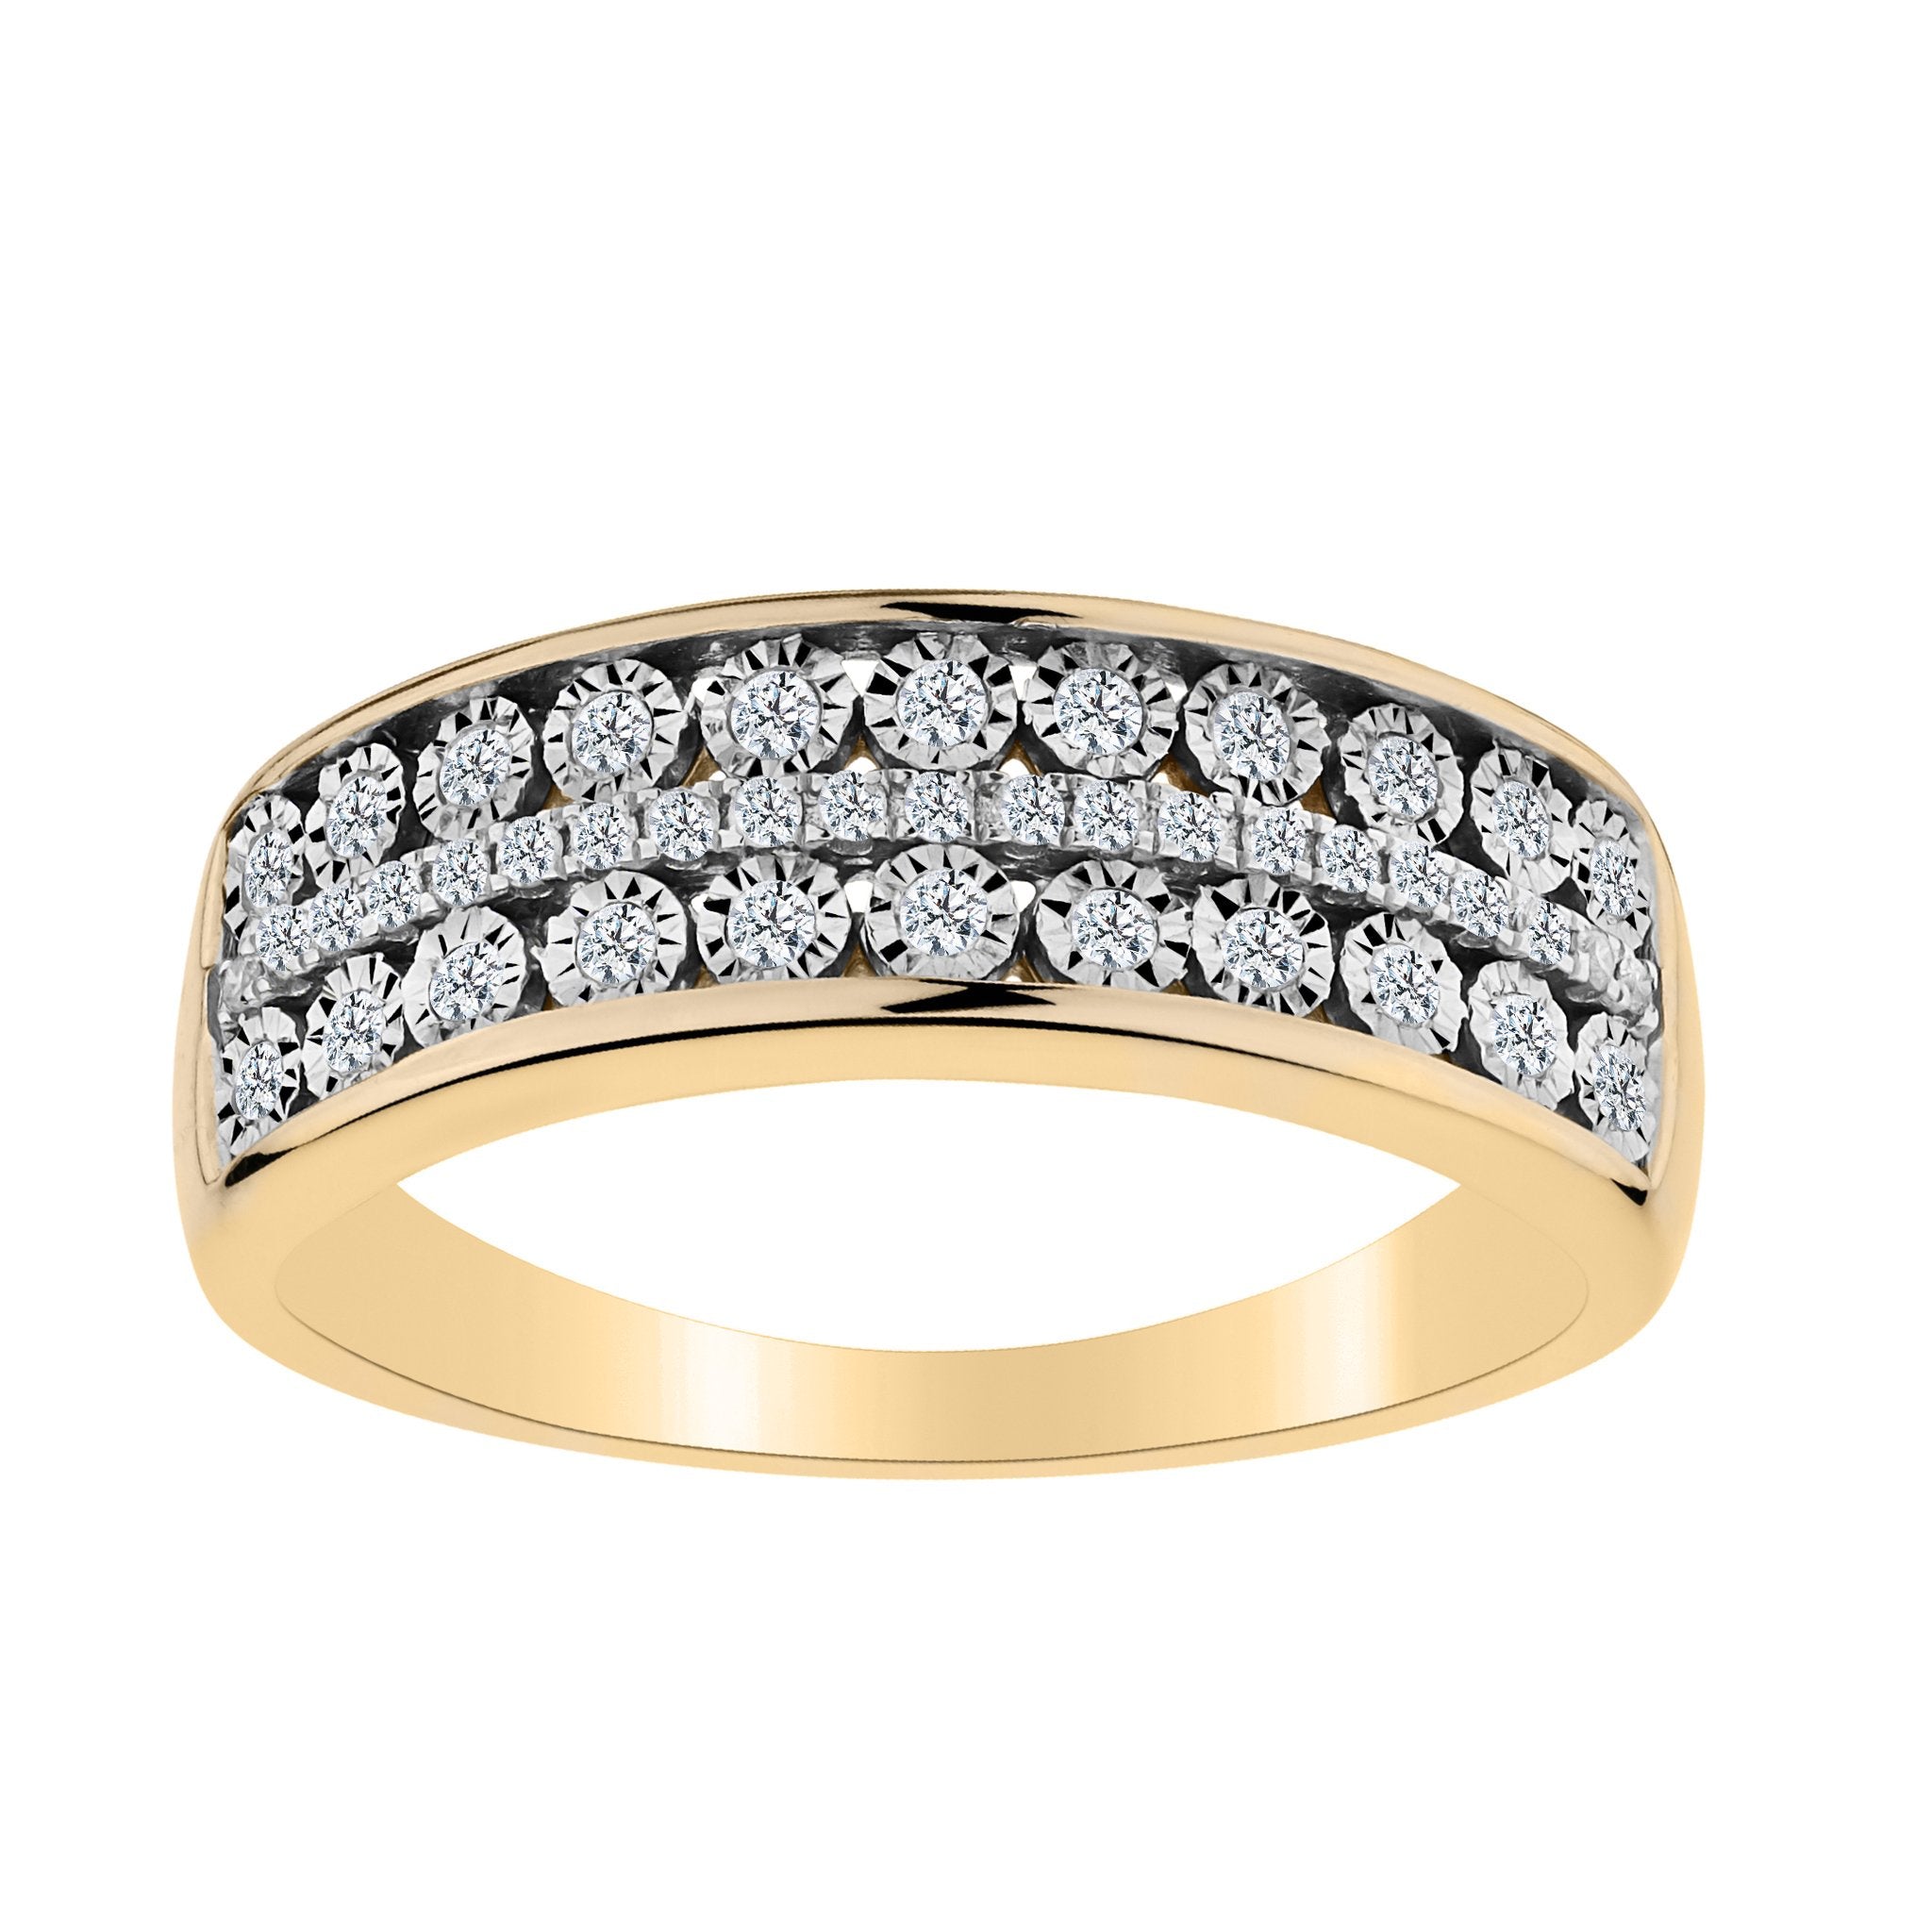 .25 Carat Diamond Ring,  10kt Yellow Gold.  Fashion Rings. Griffin Jewellery Designs